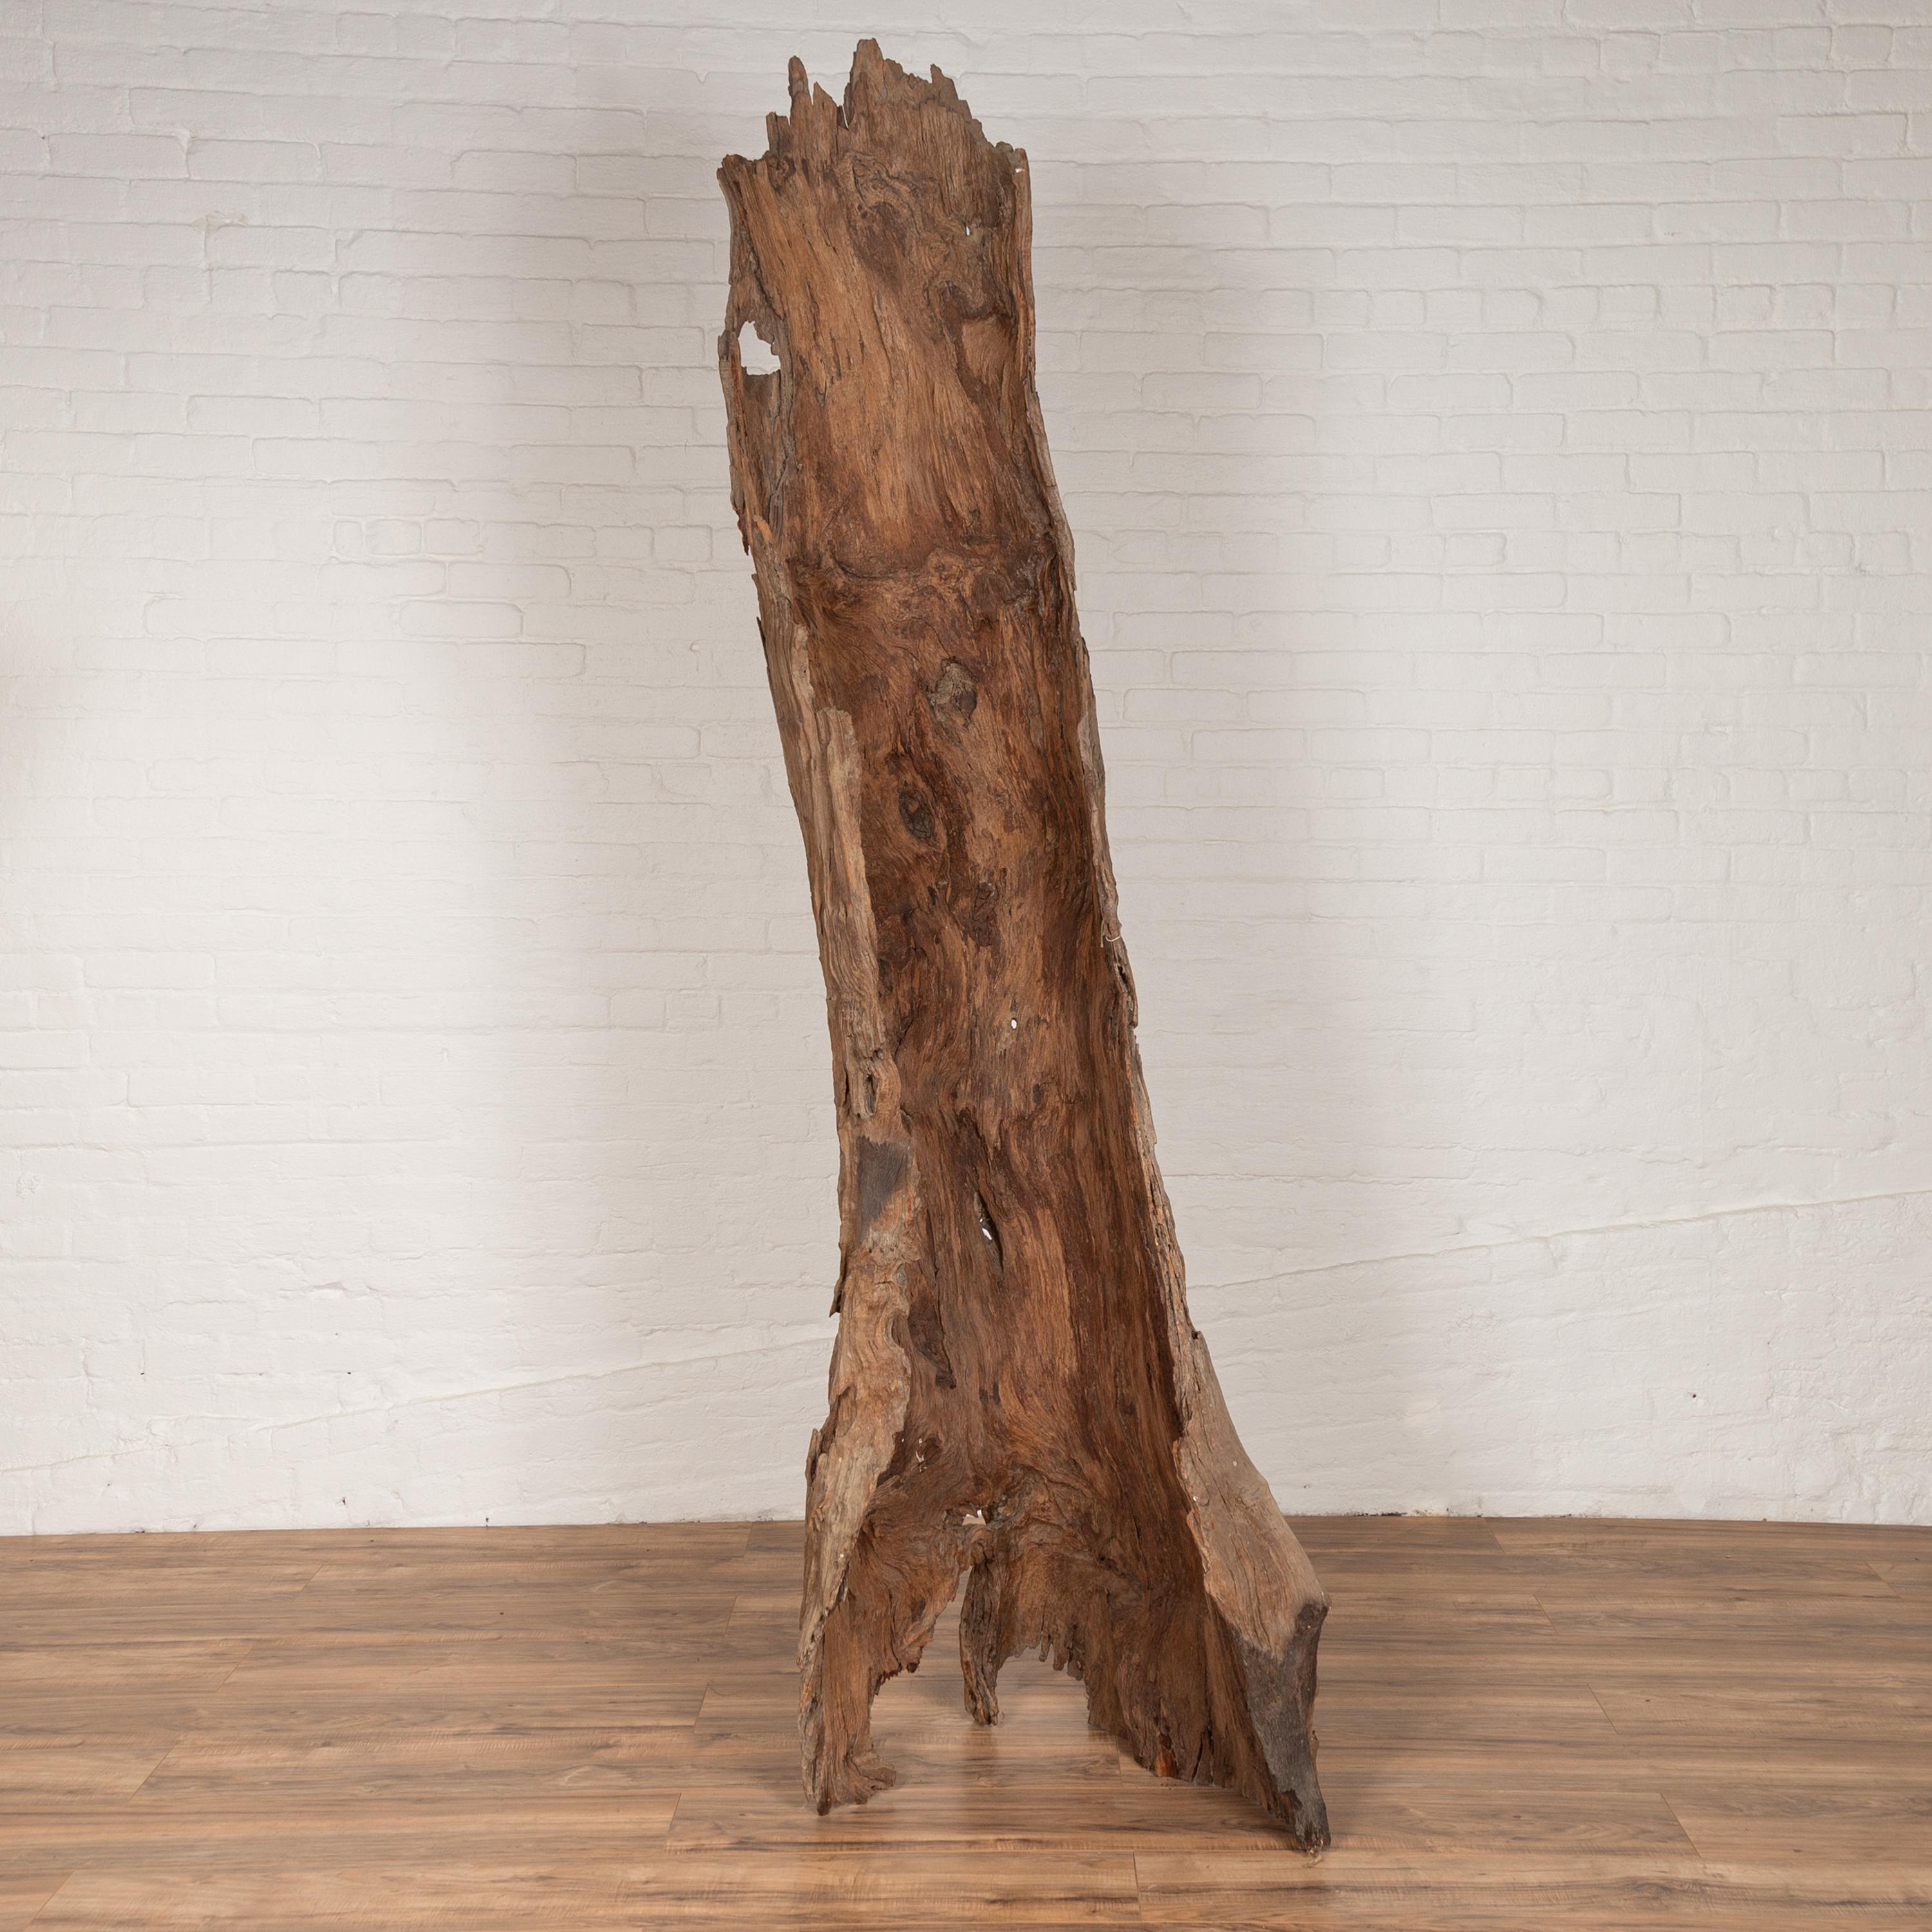 A tall northern Thai ancient driftwood carving from the Chiang Mai Region. This tall ancient driftwood carving, originating from the Chiang Mai region in Northern Thailand, is a striking piece of natural art. Found near the Ping River, it features a